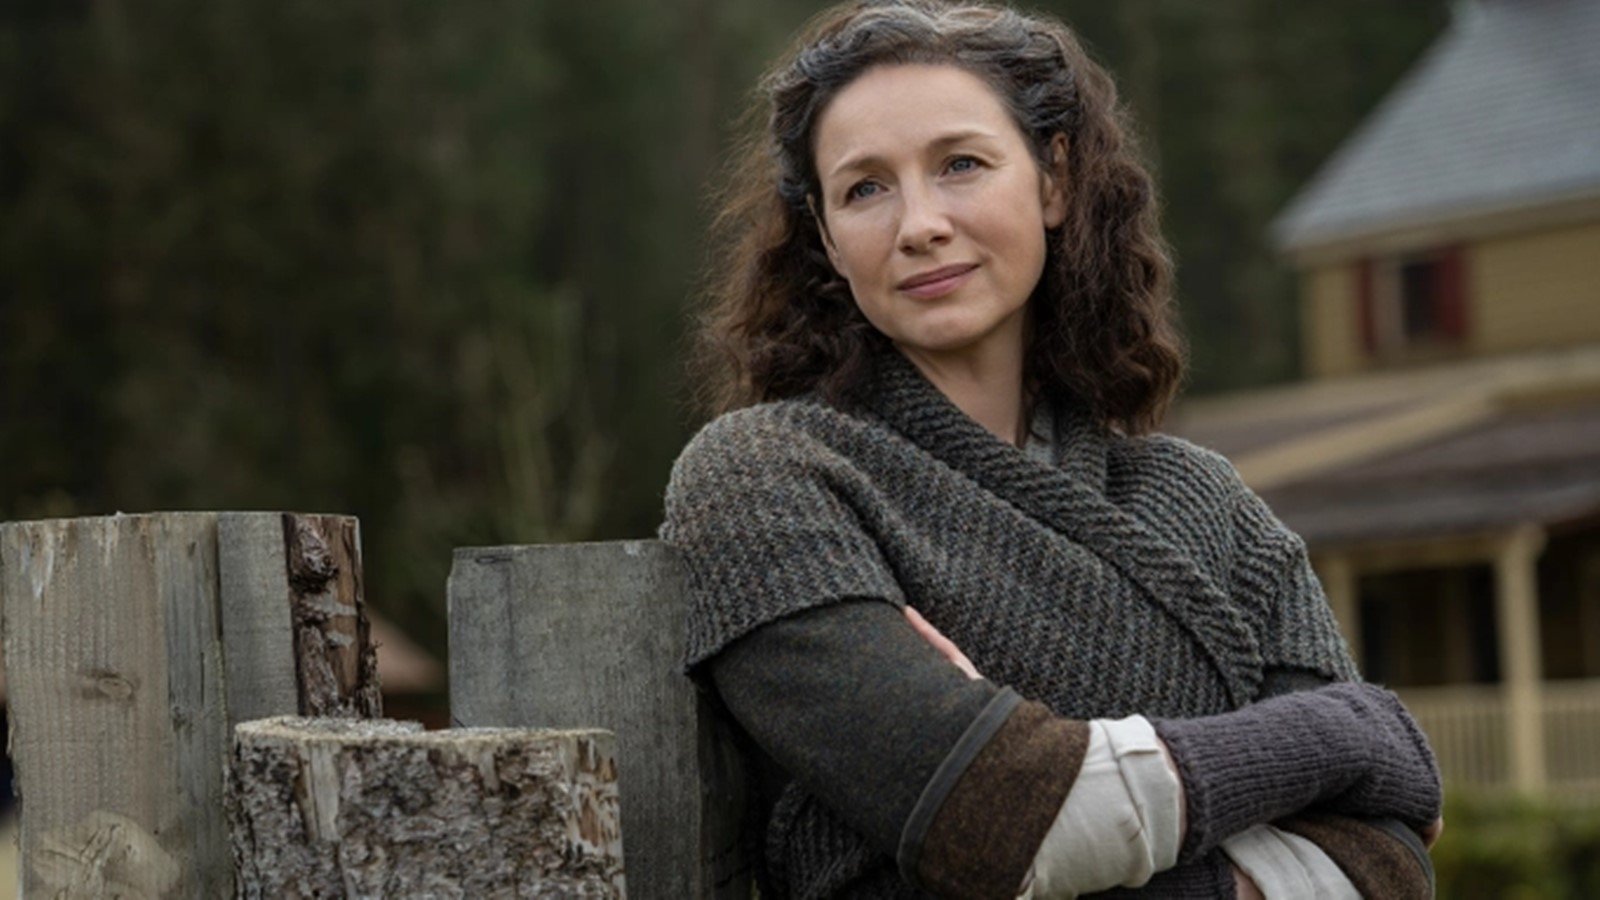 Outlander 7: Starz reveals the release date and the first photos of the unpublished episodes